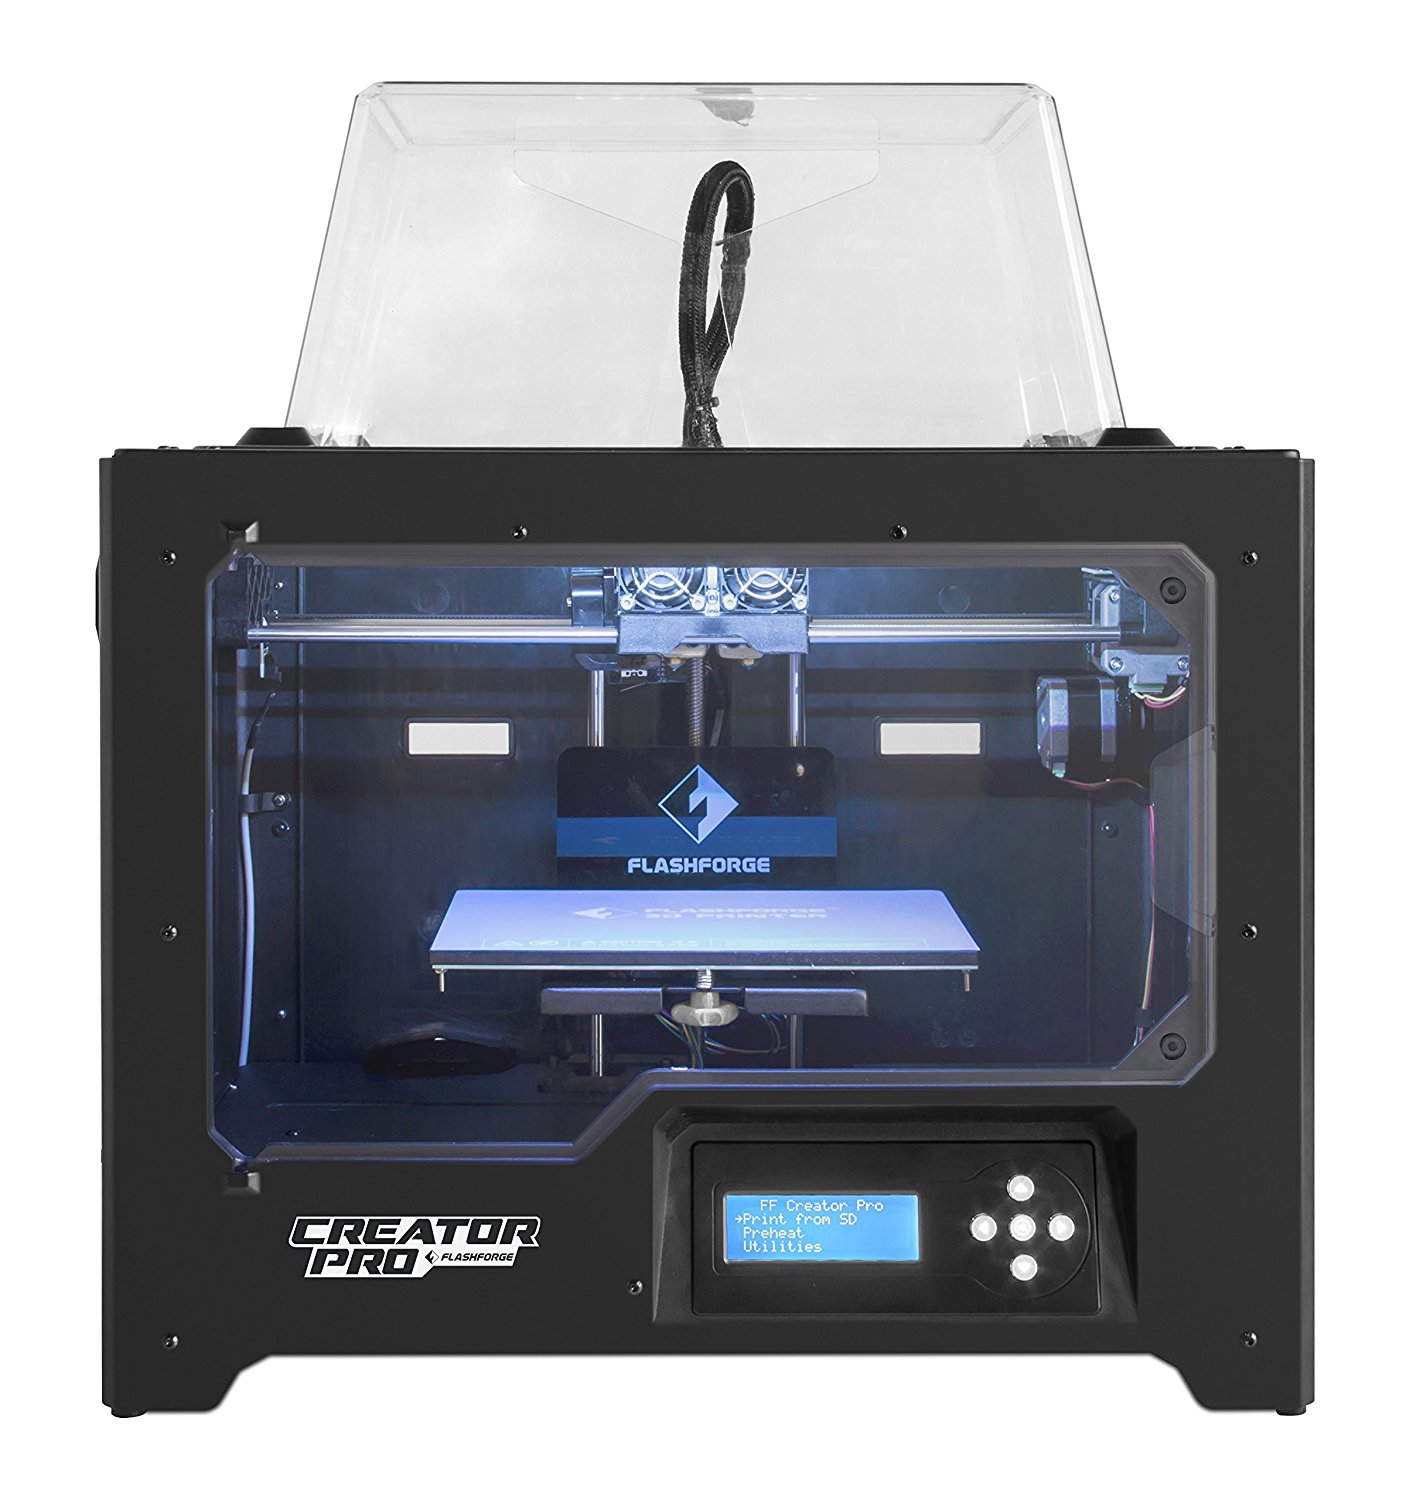 Flashforge Creator Pro black friday and cyber monday deals